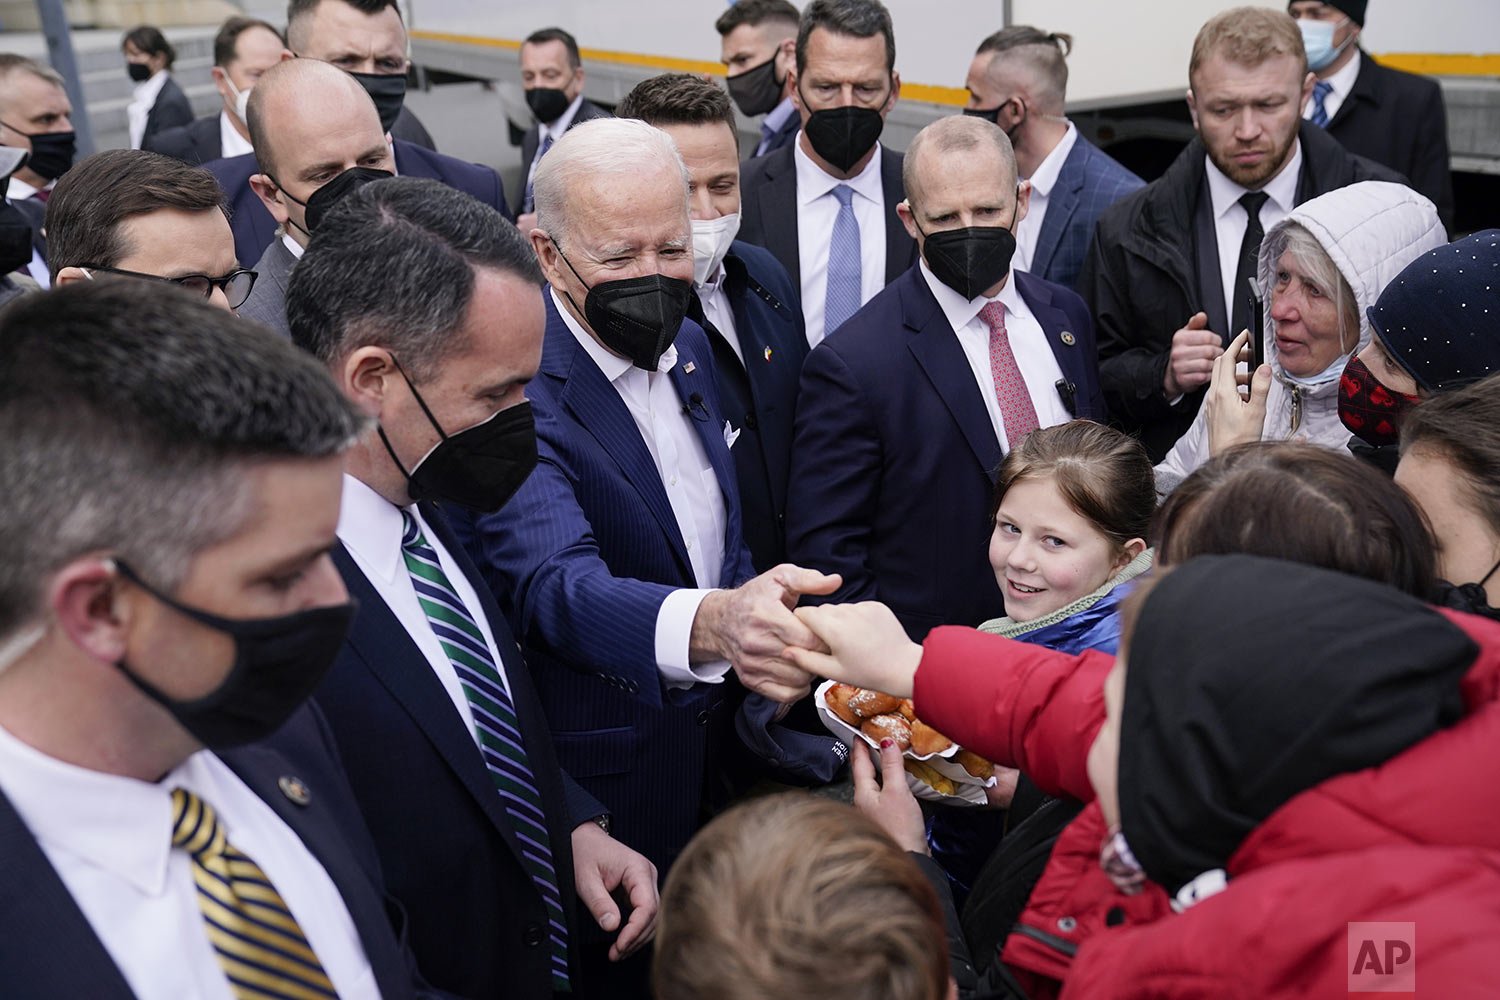  President Joe Biden meets with Ukrainian refugees and humanitarian aid workers during a visit to PGE Narodowy Stadium, in Warsaw, Saturday, March 26, 2022. (AP Photo/Evan Vucci) 